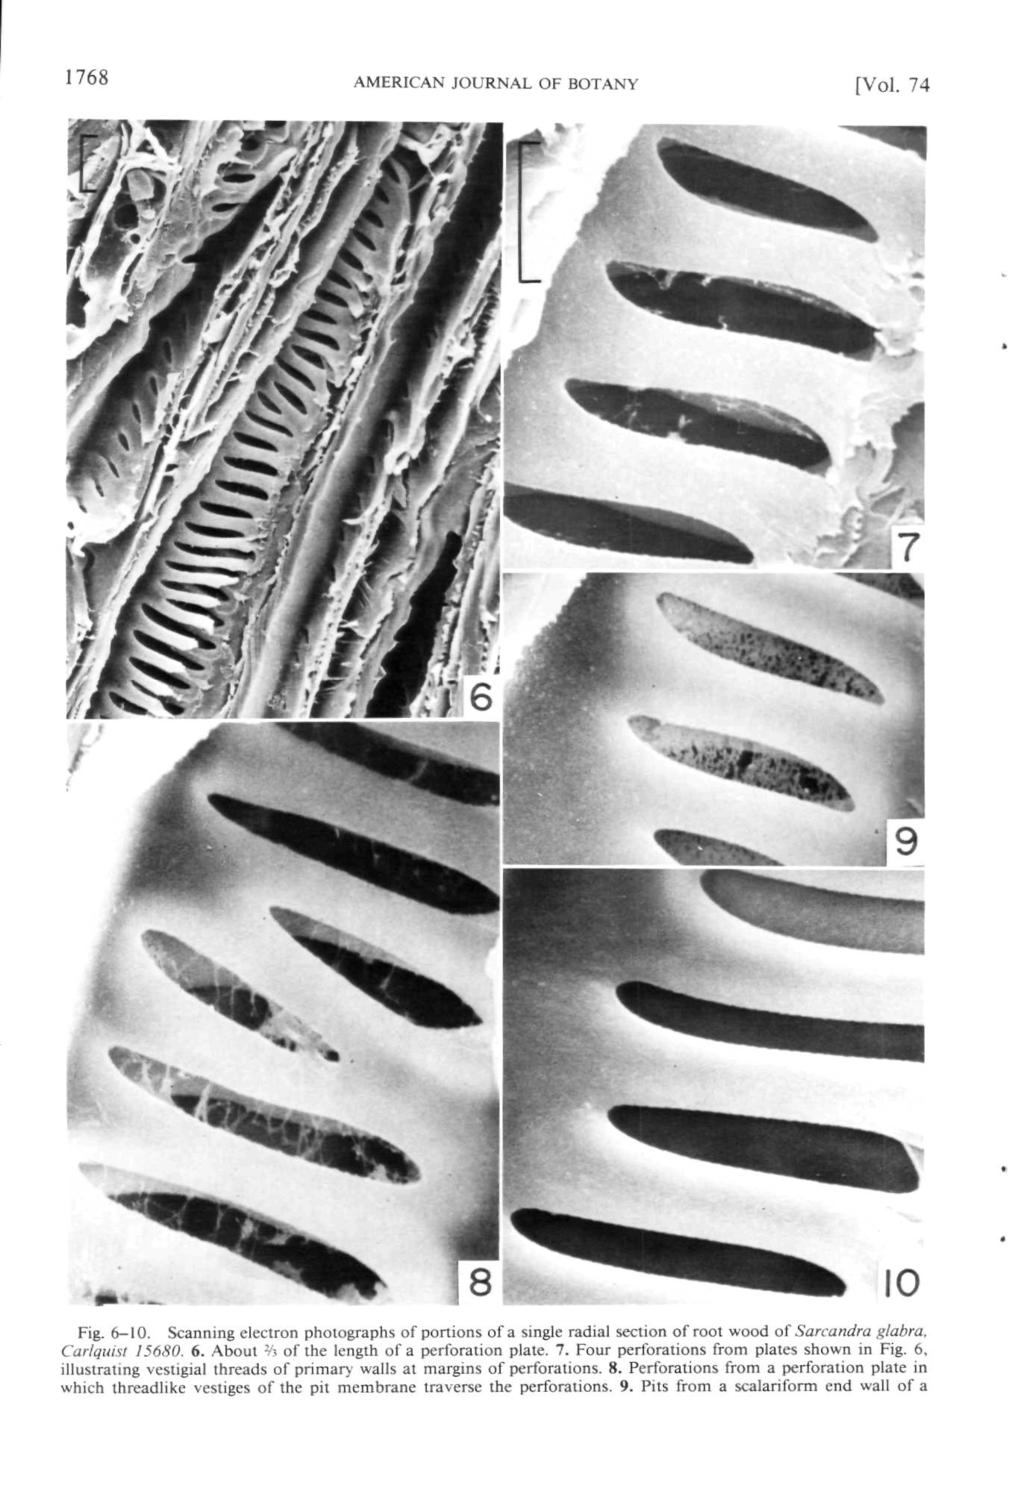 1768 AMERICAN JOURNAL OF BOTANY [Vol. 74 Fig. 6-10. Scanning electron photographs of portions of a single radial section of root wood of Sarcandra glabra. Carlquist 15680. 6. About % of the length of a perforation plate.